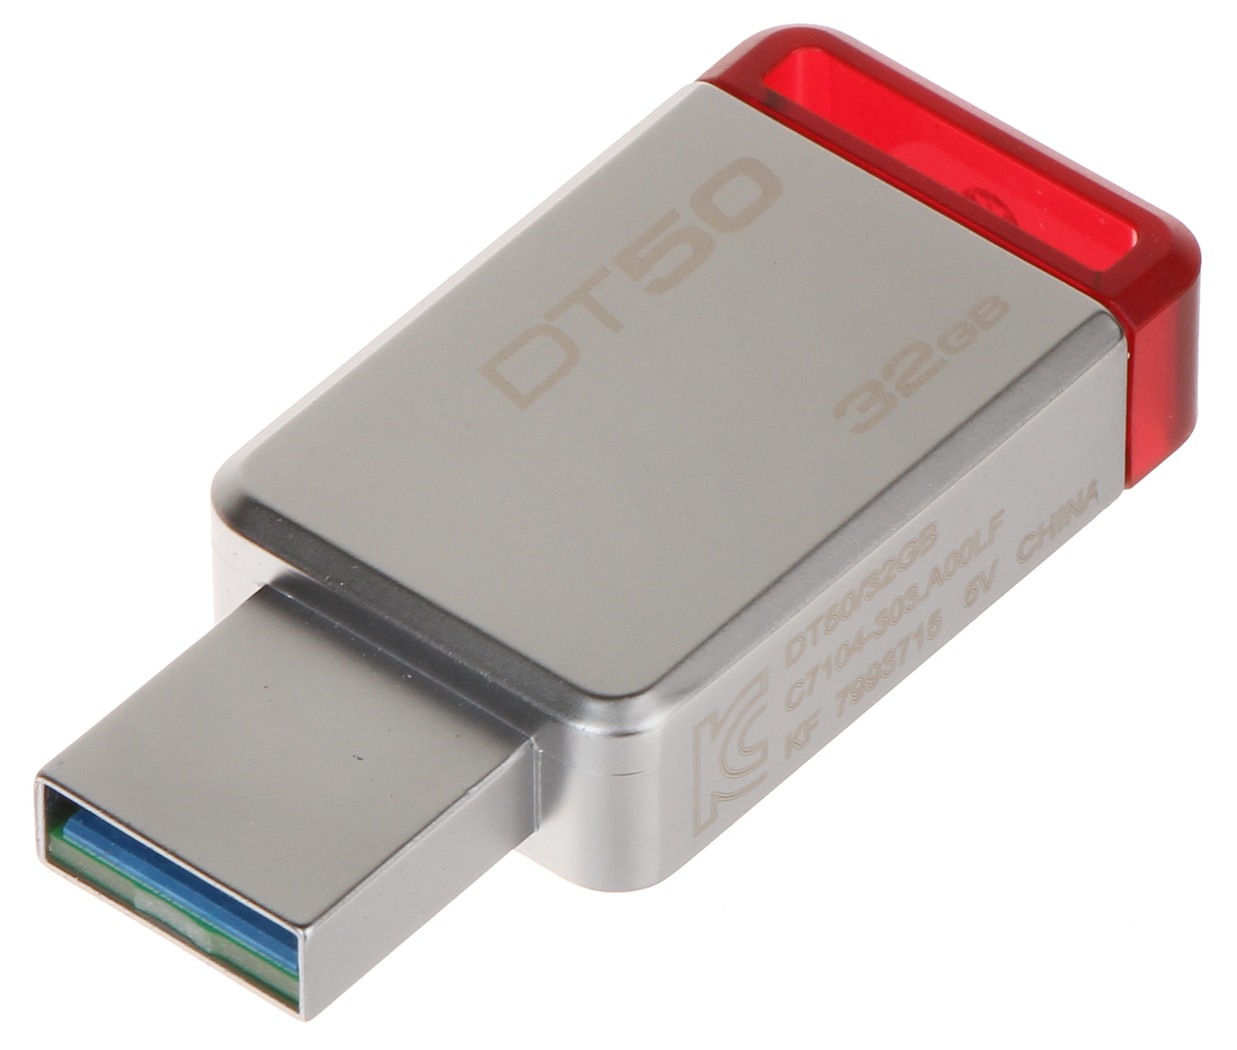 PENDRIVE FD-32/DT50-KING 32 GB USB 3.1/3.0 KINGSTON - PenDrives and Memory  Cards - Delta